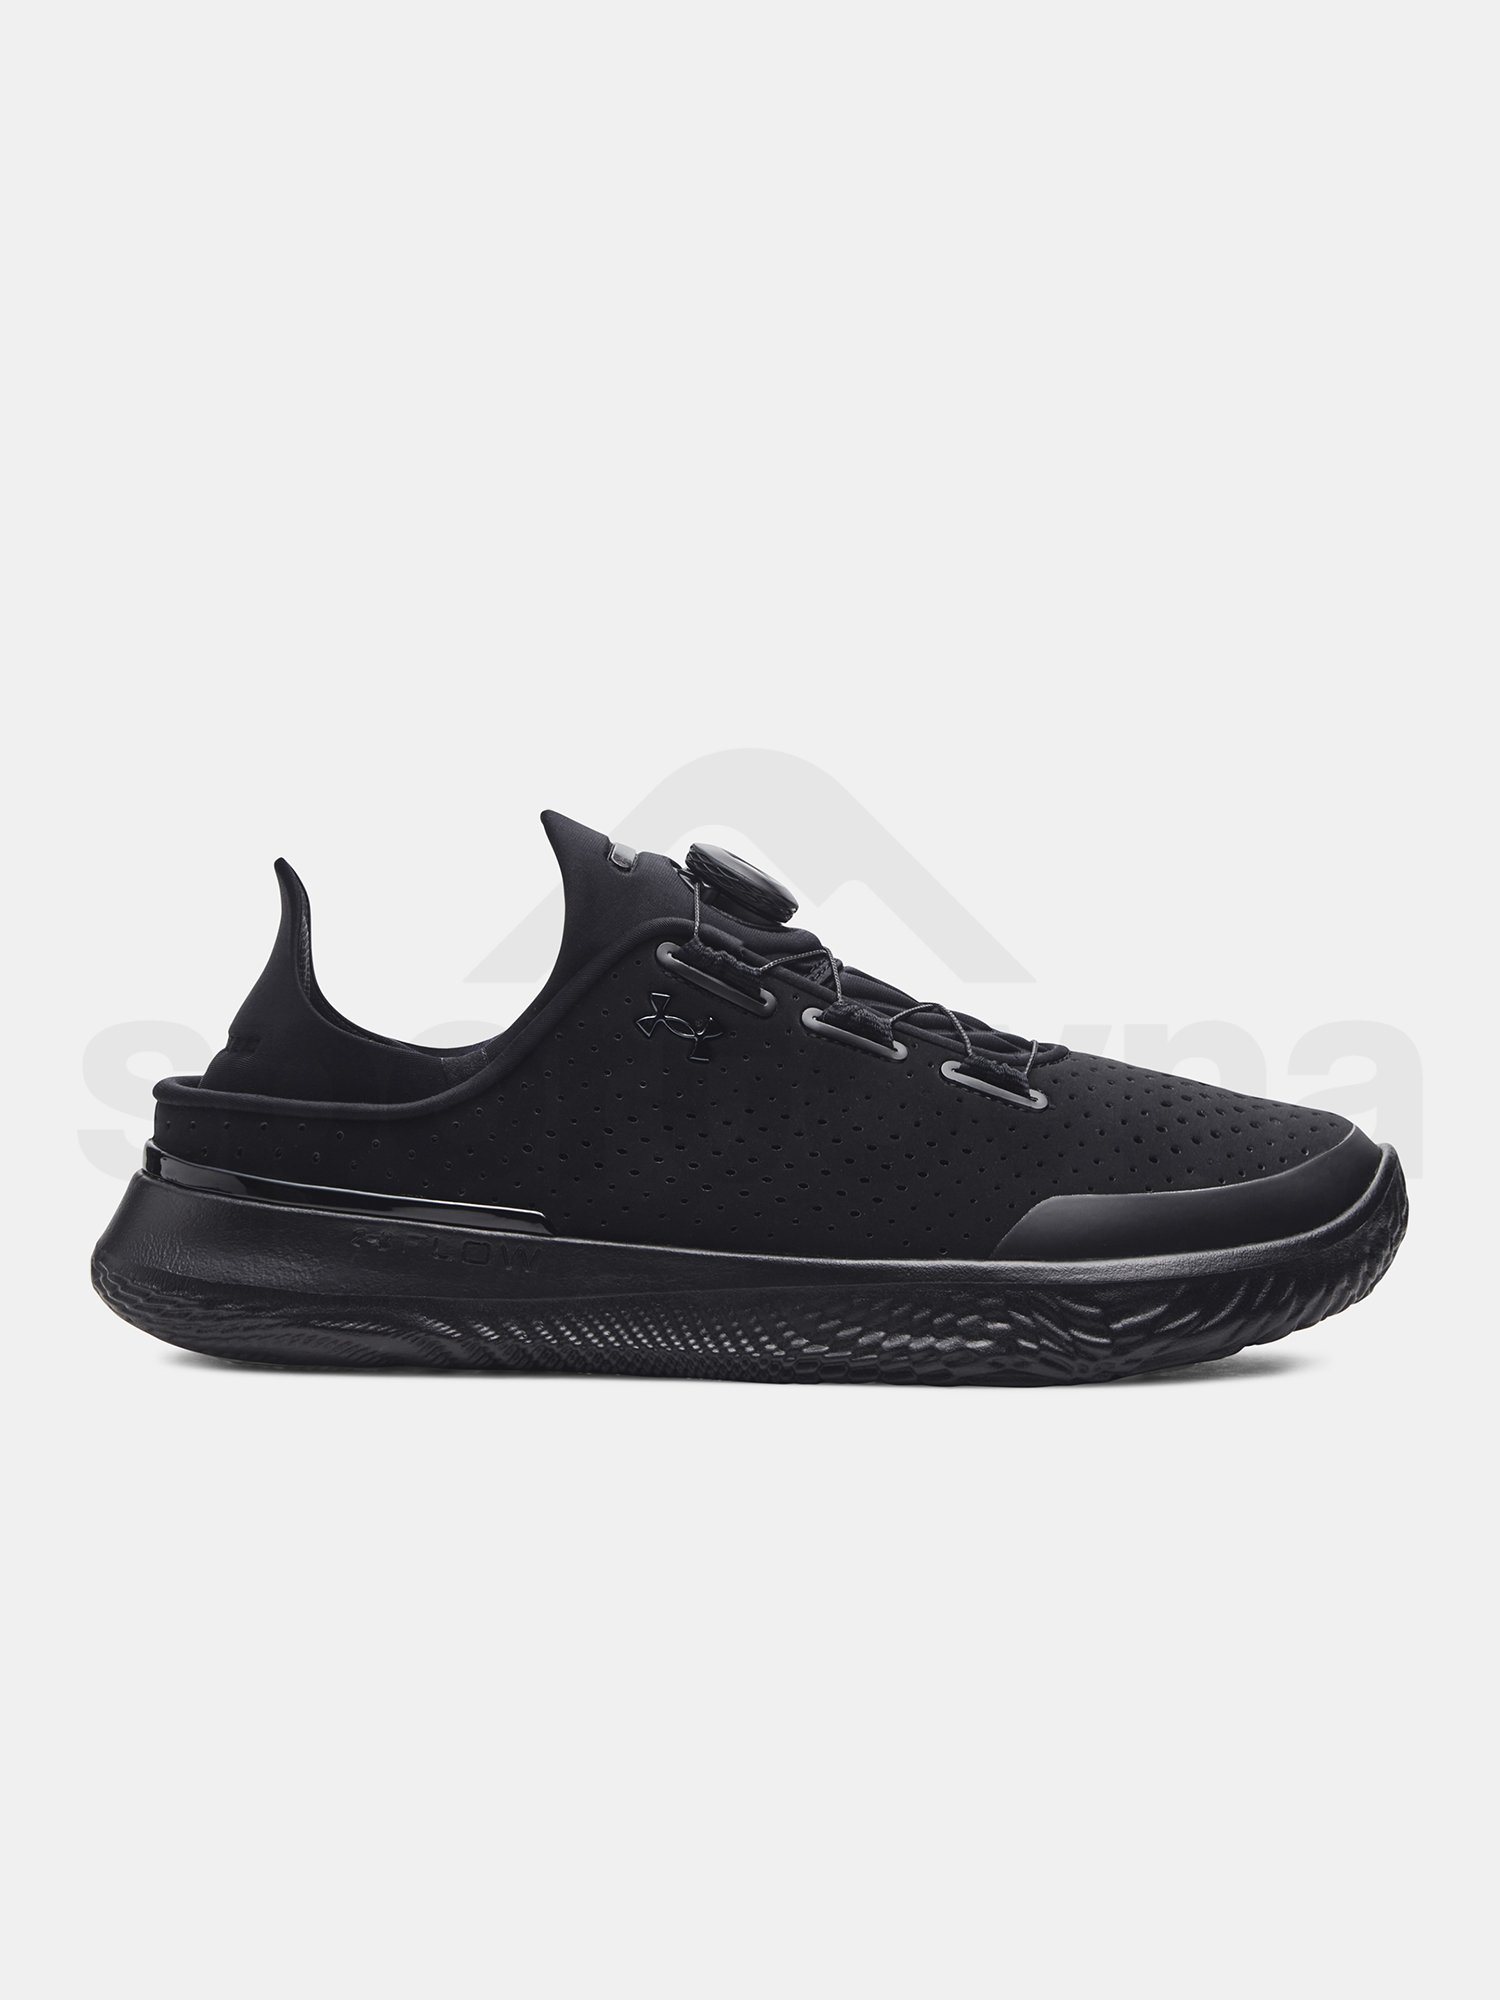 Boty Under Armour UA Slipspeed Trainer NB-BLK